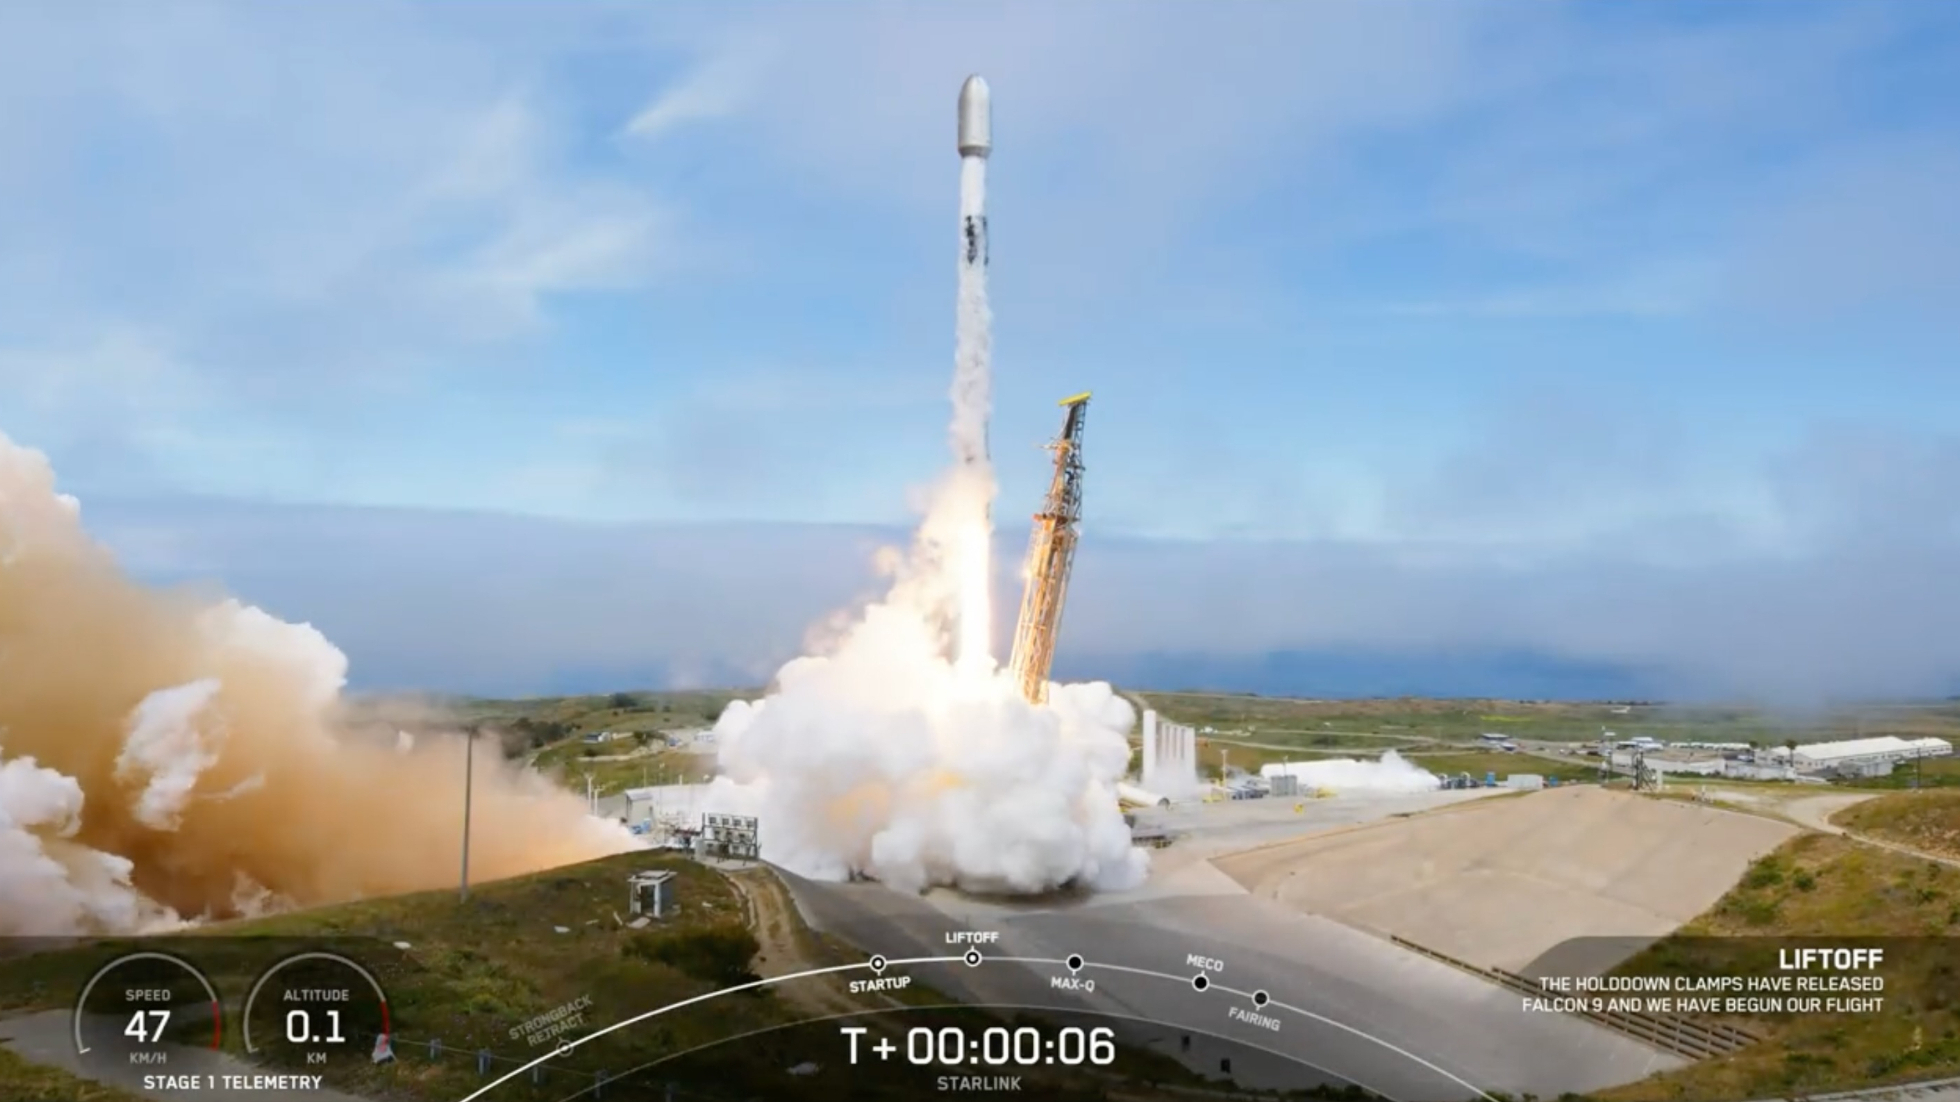 Watch SpaceX send Earth-observing satellite to orbit today on 2nd leg of doubleheader Space